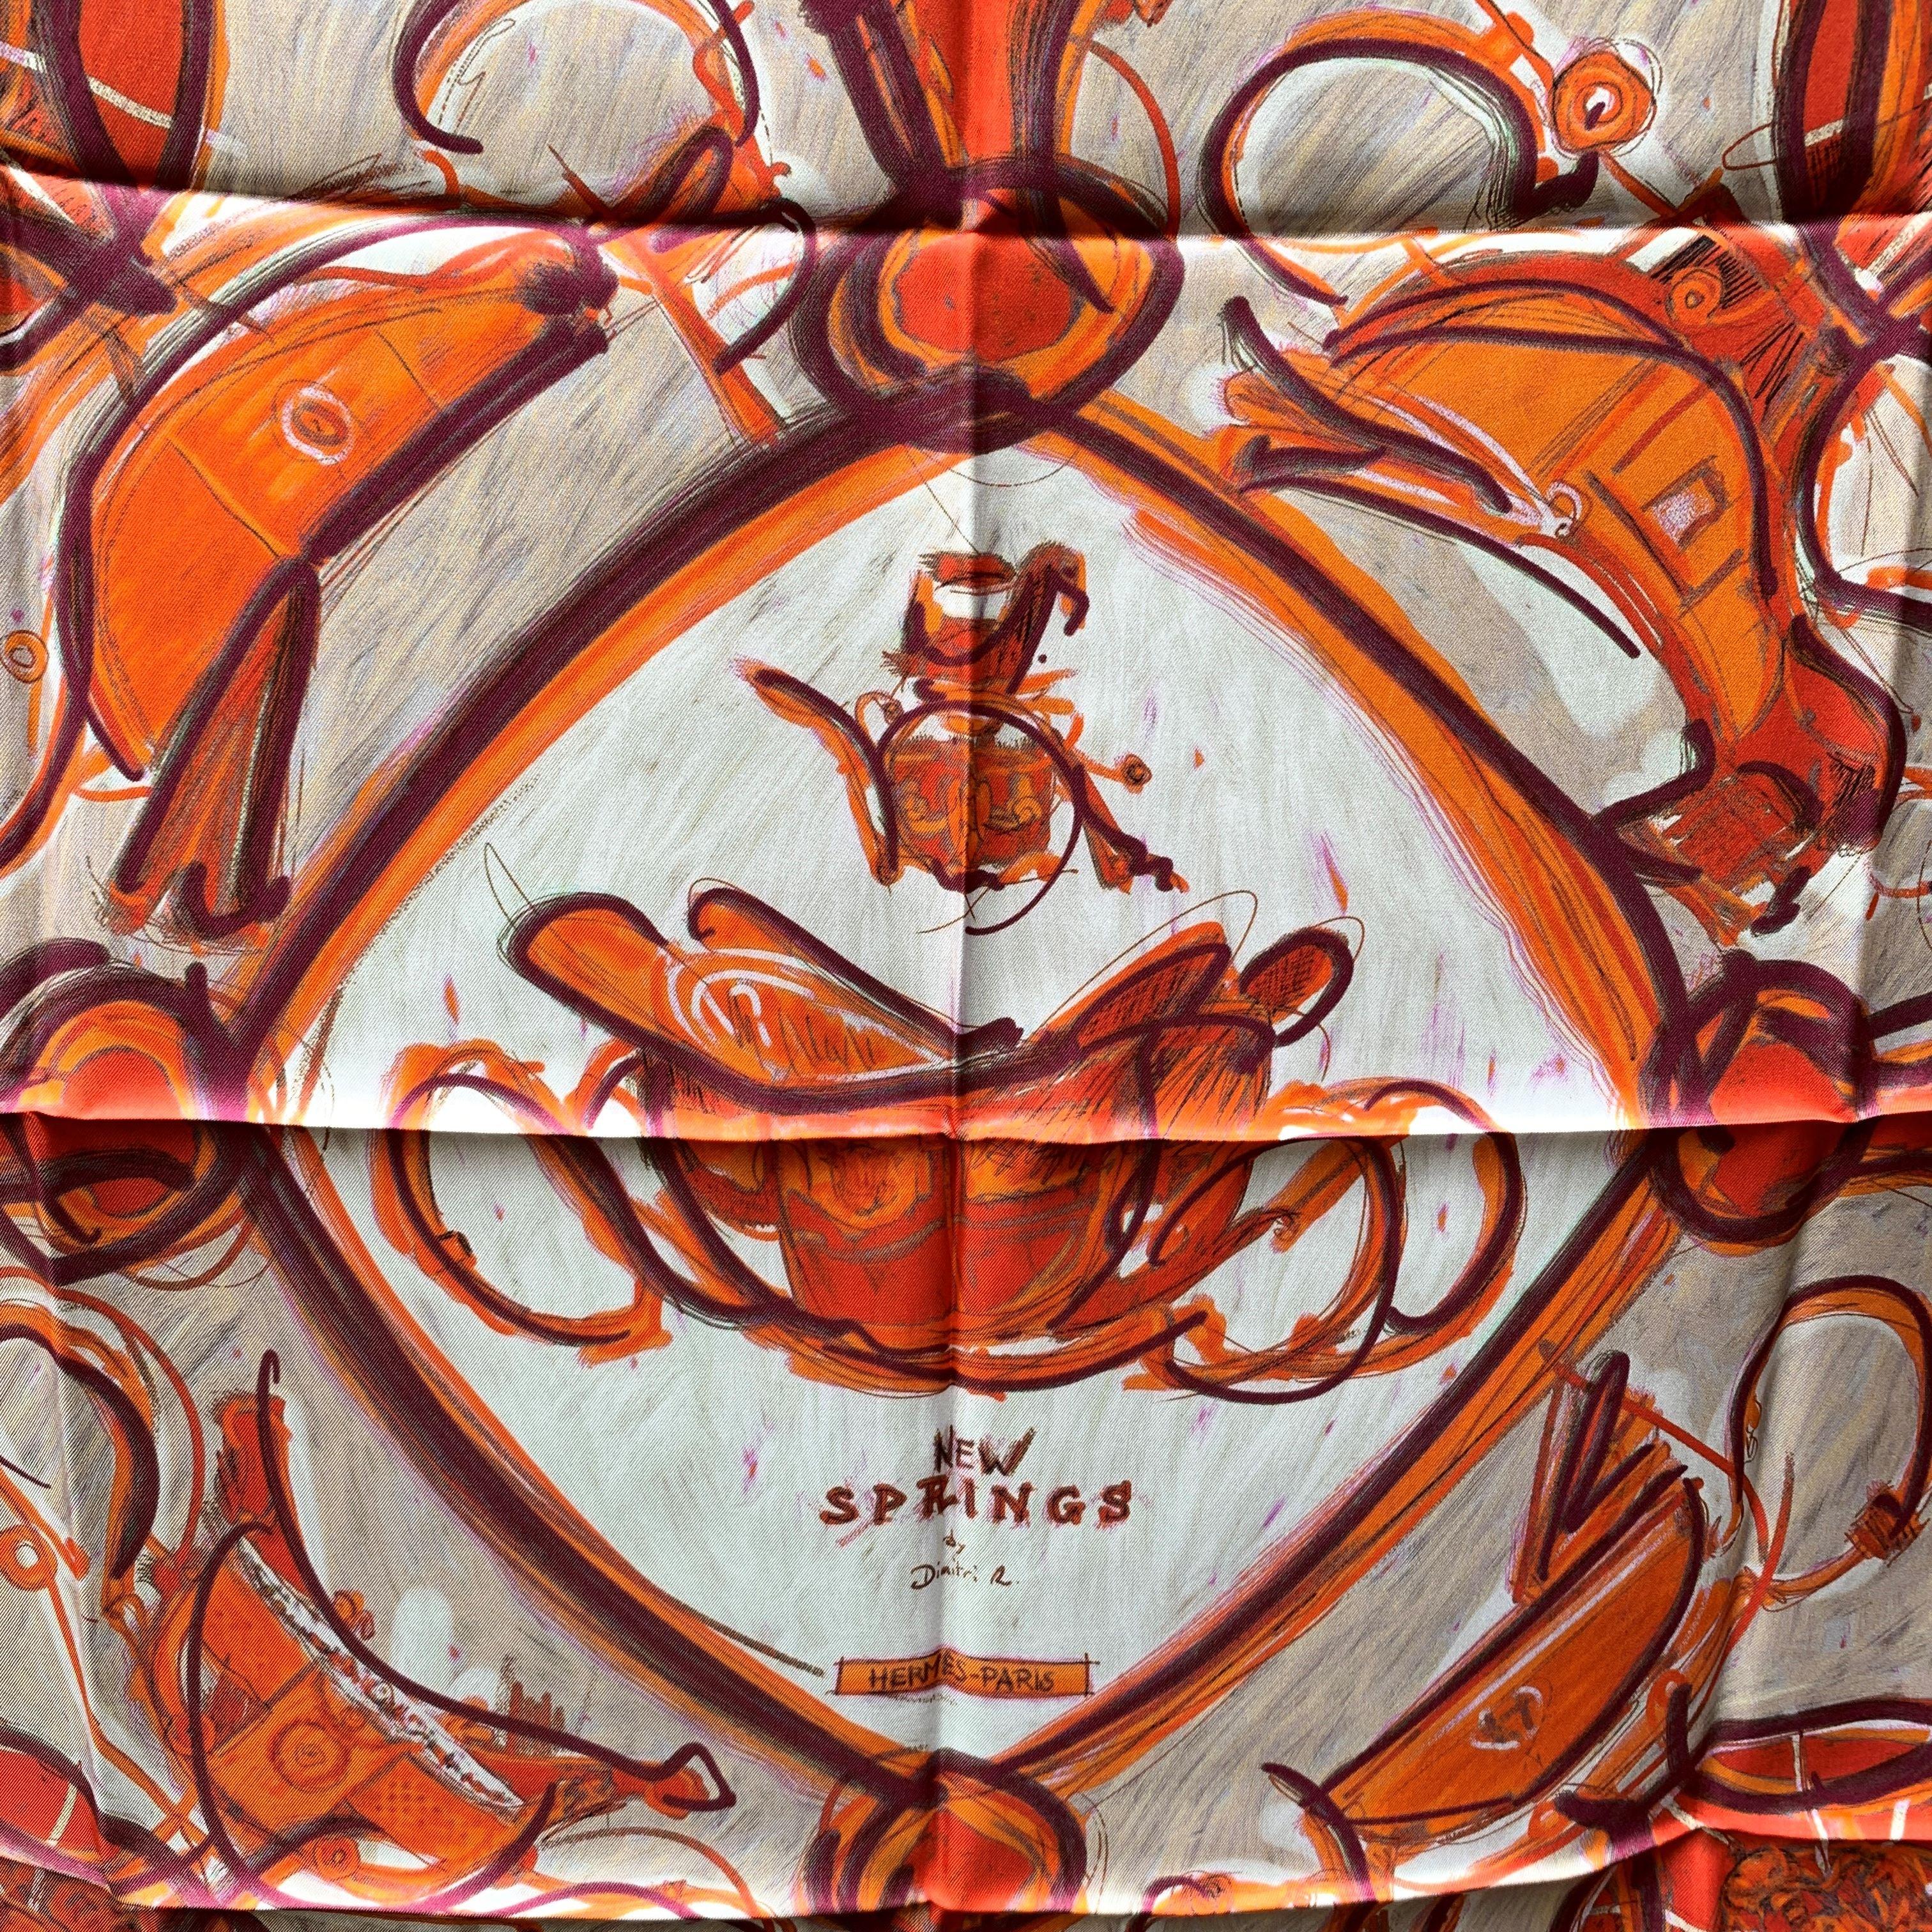 Hermes Paris Silk Scarf 'NewSprings', designed by Dimitri Rybaltchenko, from the 2009 collection. It is a reinterpretation of Philippe Ledoux's classic 1974 Springs design. It depicts in its center the phaeton carriage belonging to Napoleon I's son.